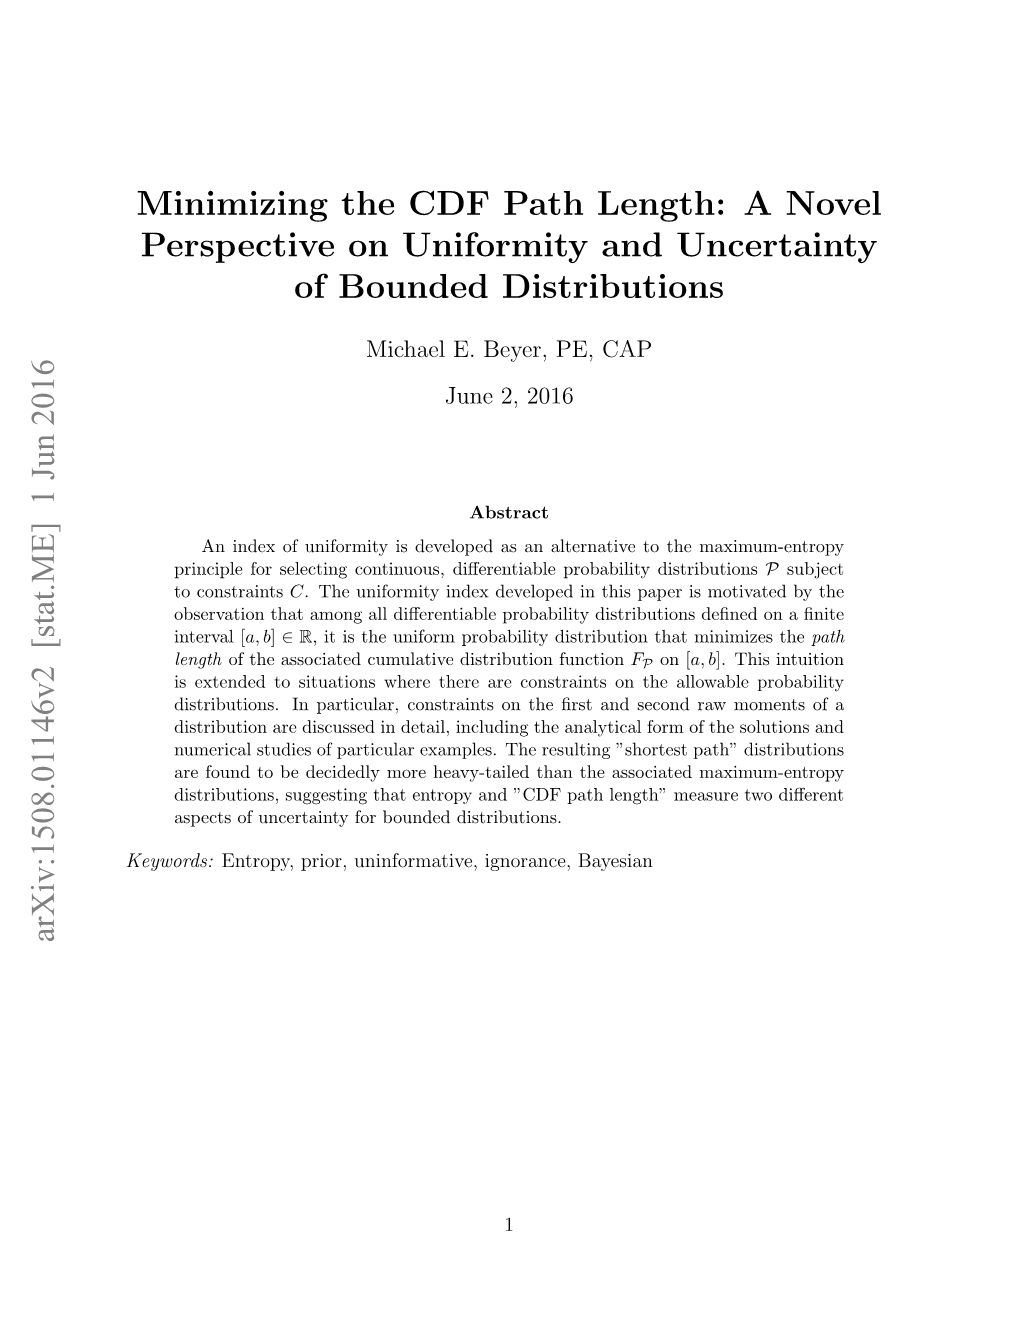 Minimizing the CDF Path Length: a Novel Perspective on Uniformity and Uncertainty of Bounded Distributions